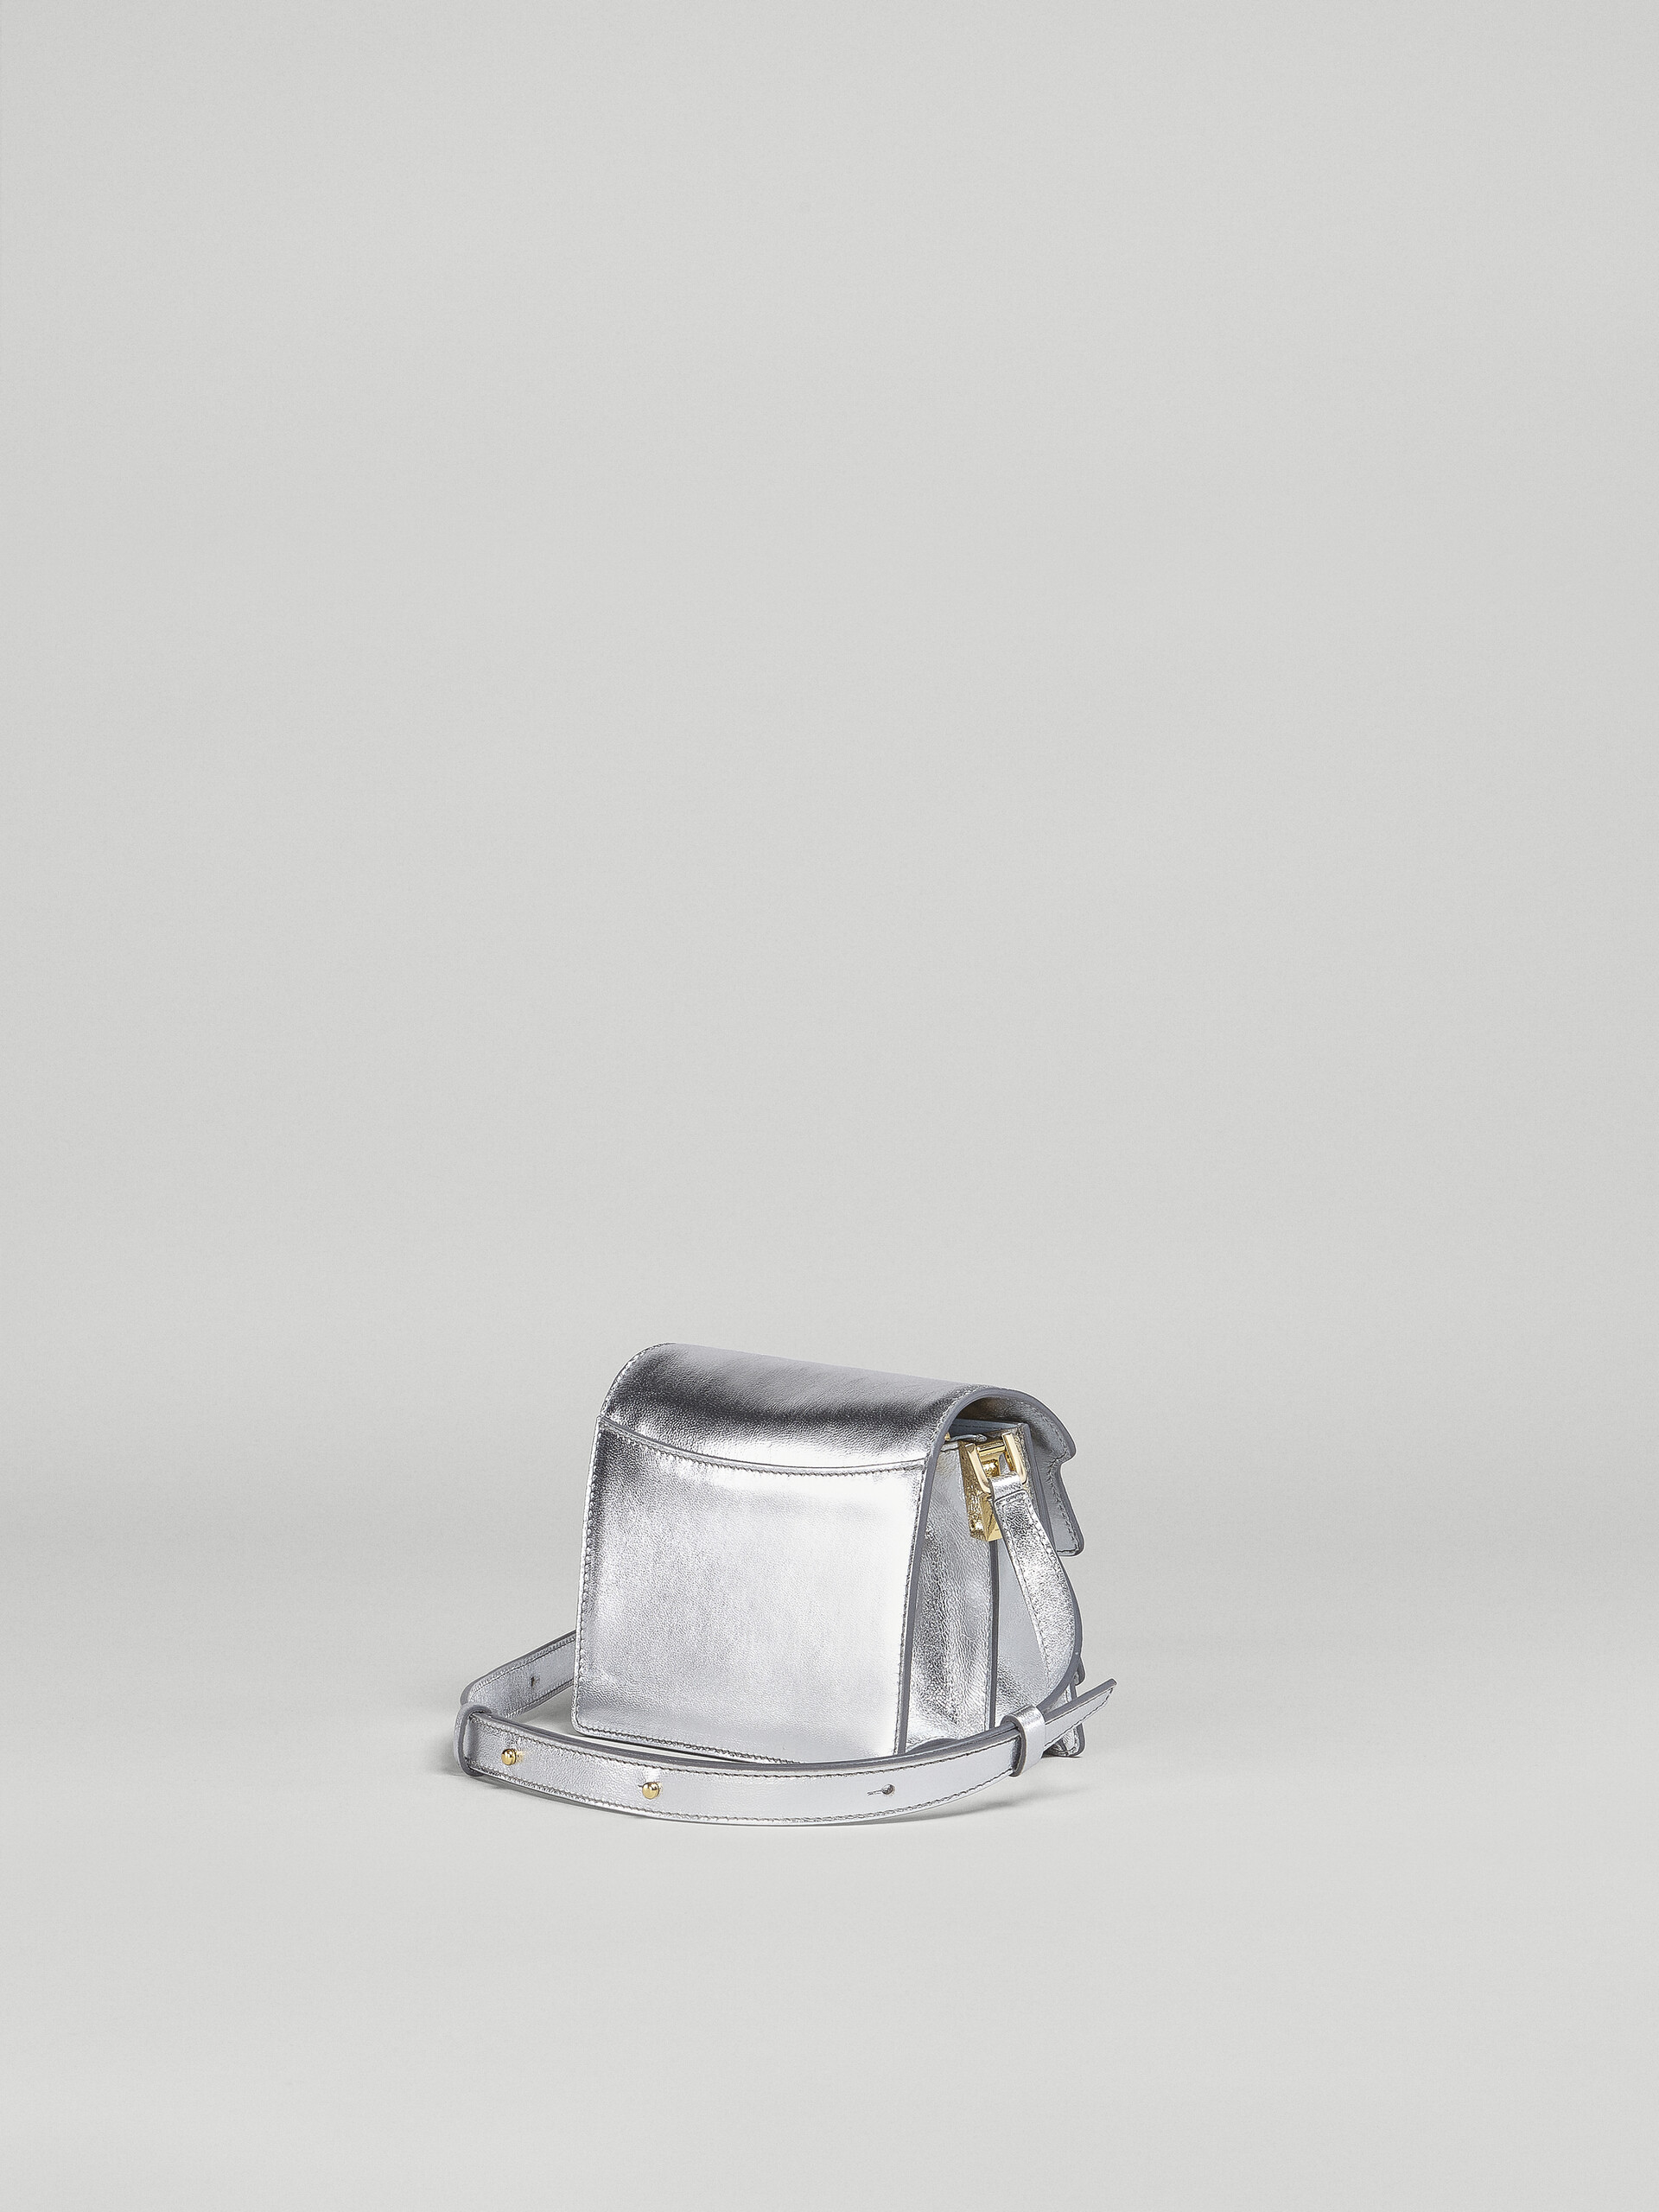 TRUNK SOFT mini bag in silver metallic leather - Shoulder Bags - Image 2